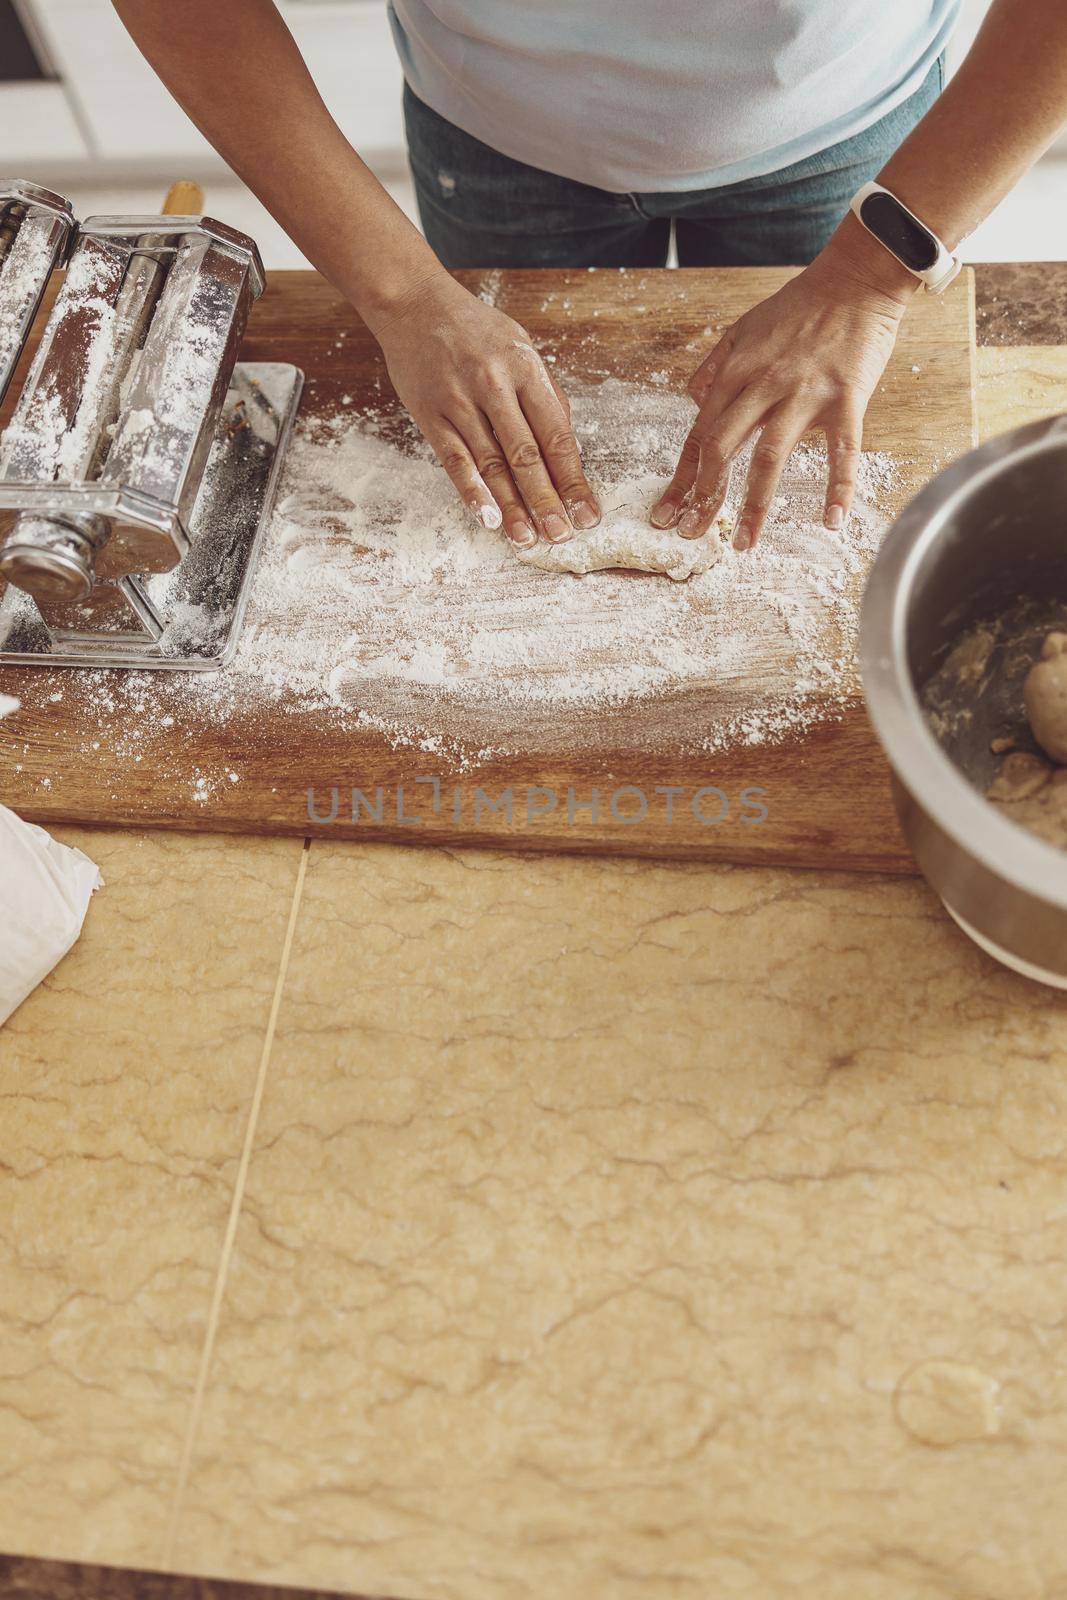 A woman's hands roll out a piece of noodle dough on a wooden board covered with flour. by Yaroslav_astakhov